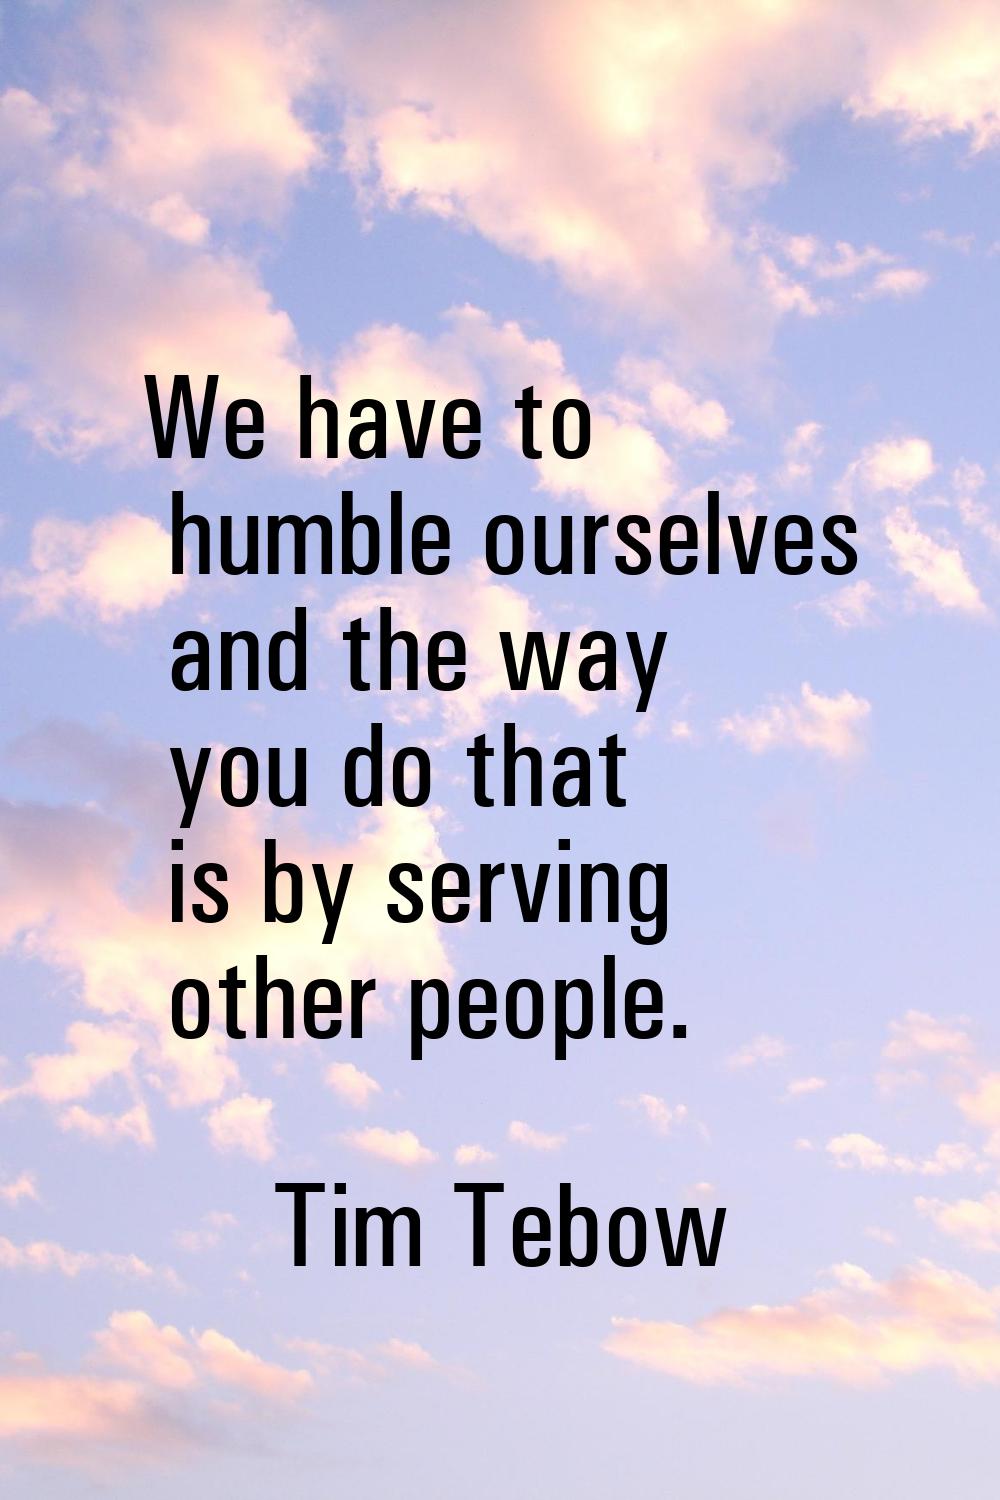 We have to humble ourselves and the way you do that is by serving other people.